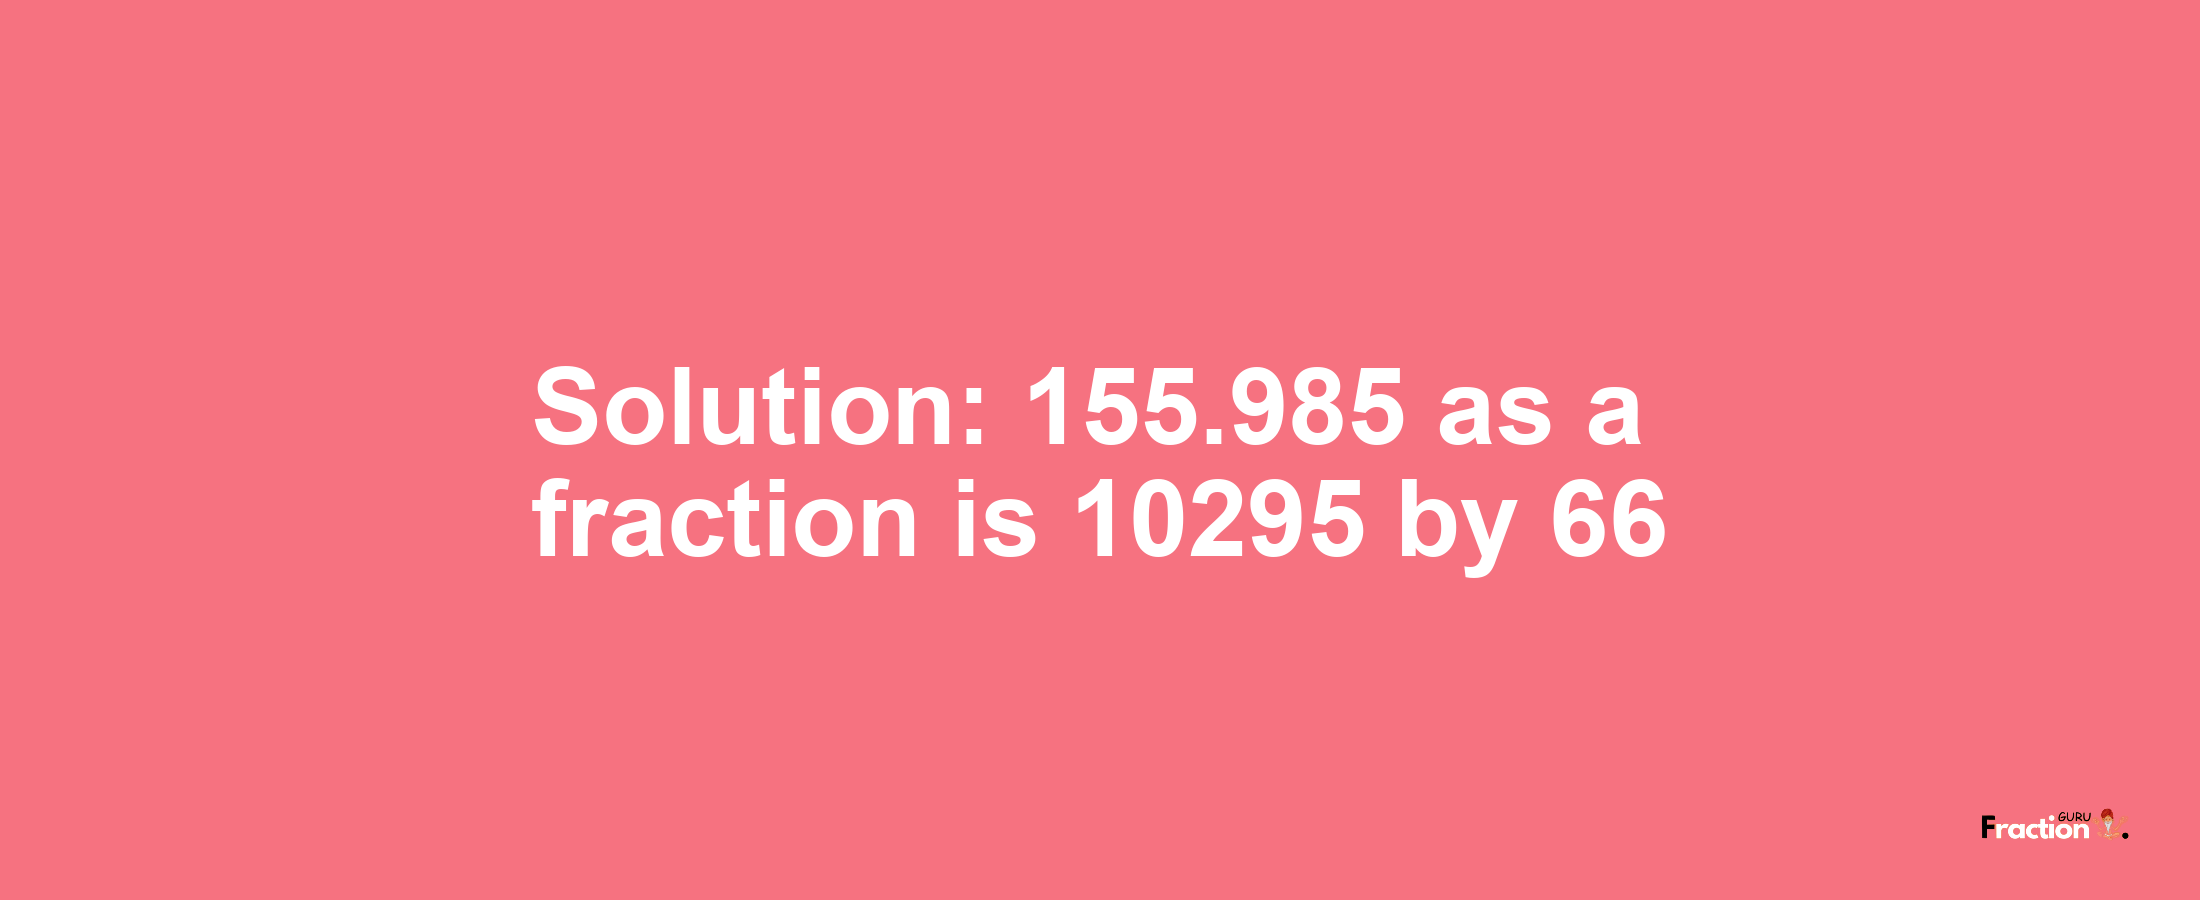 Solution:155.985 as a fraction is 10295/66